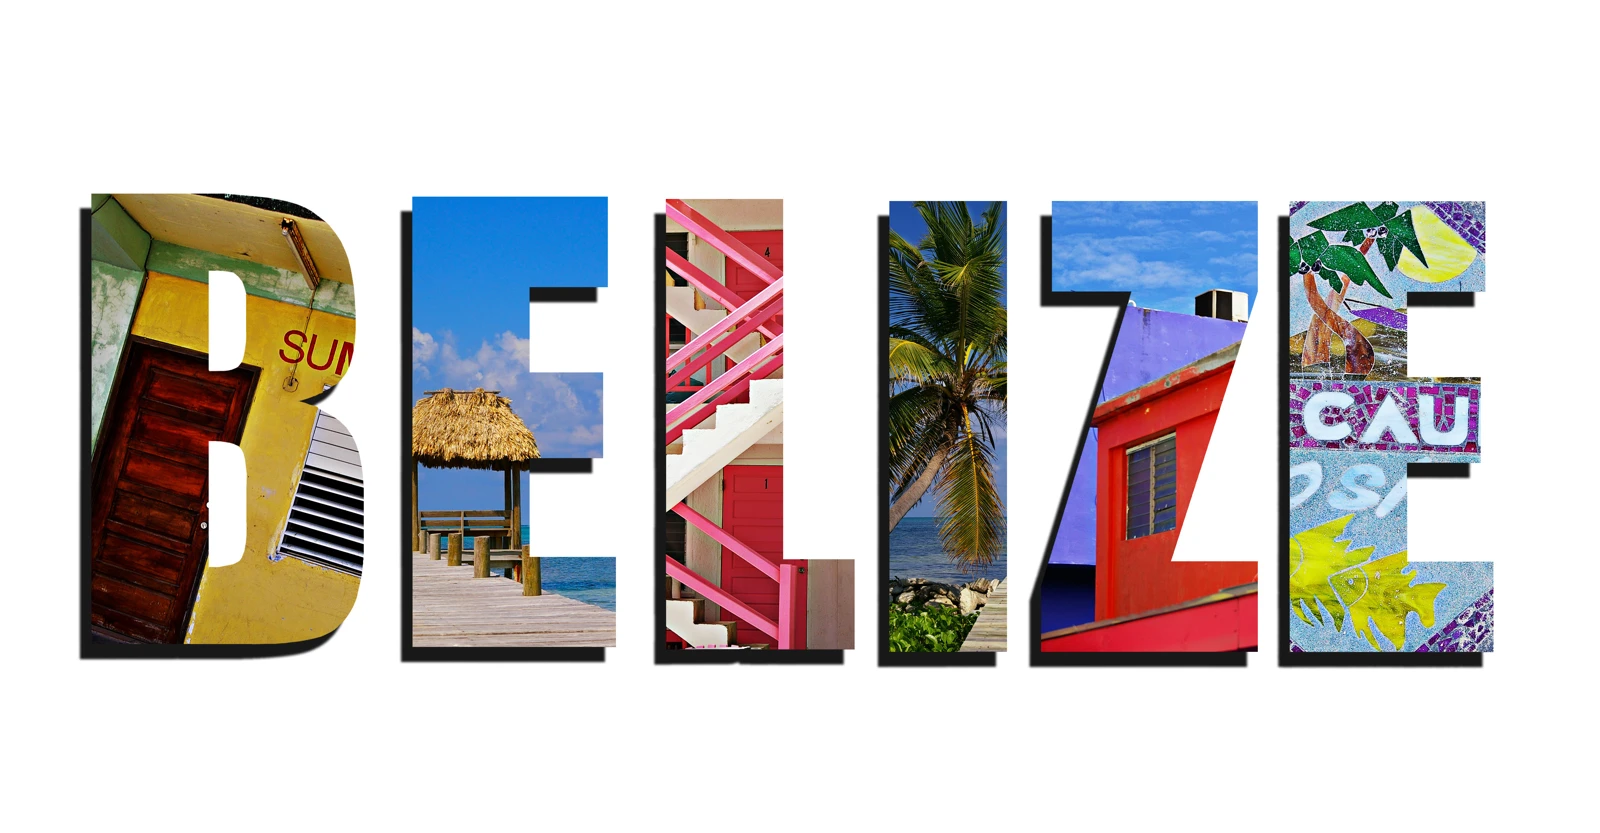 Belize 101 – Let’s Explore Belize and Review Common Real Estate Myths and Misconceptions